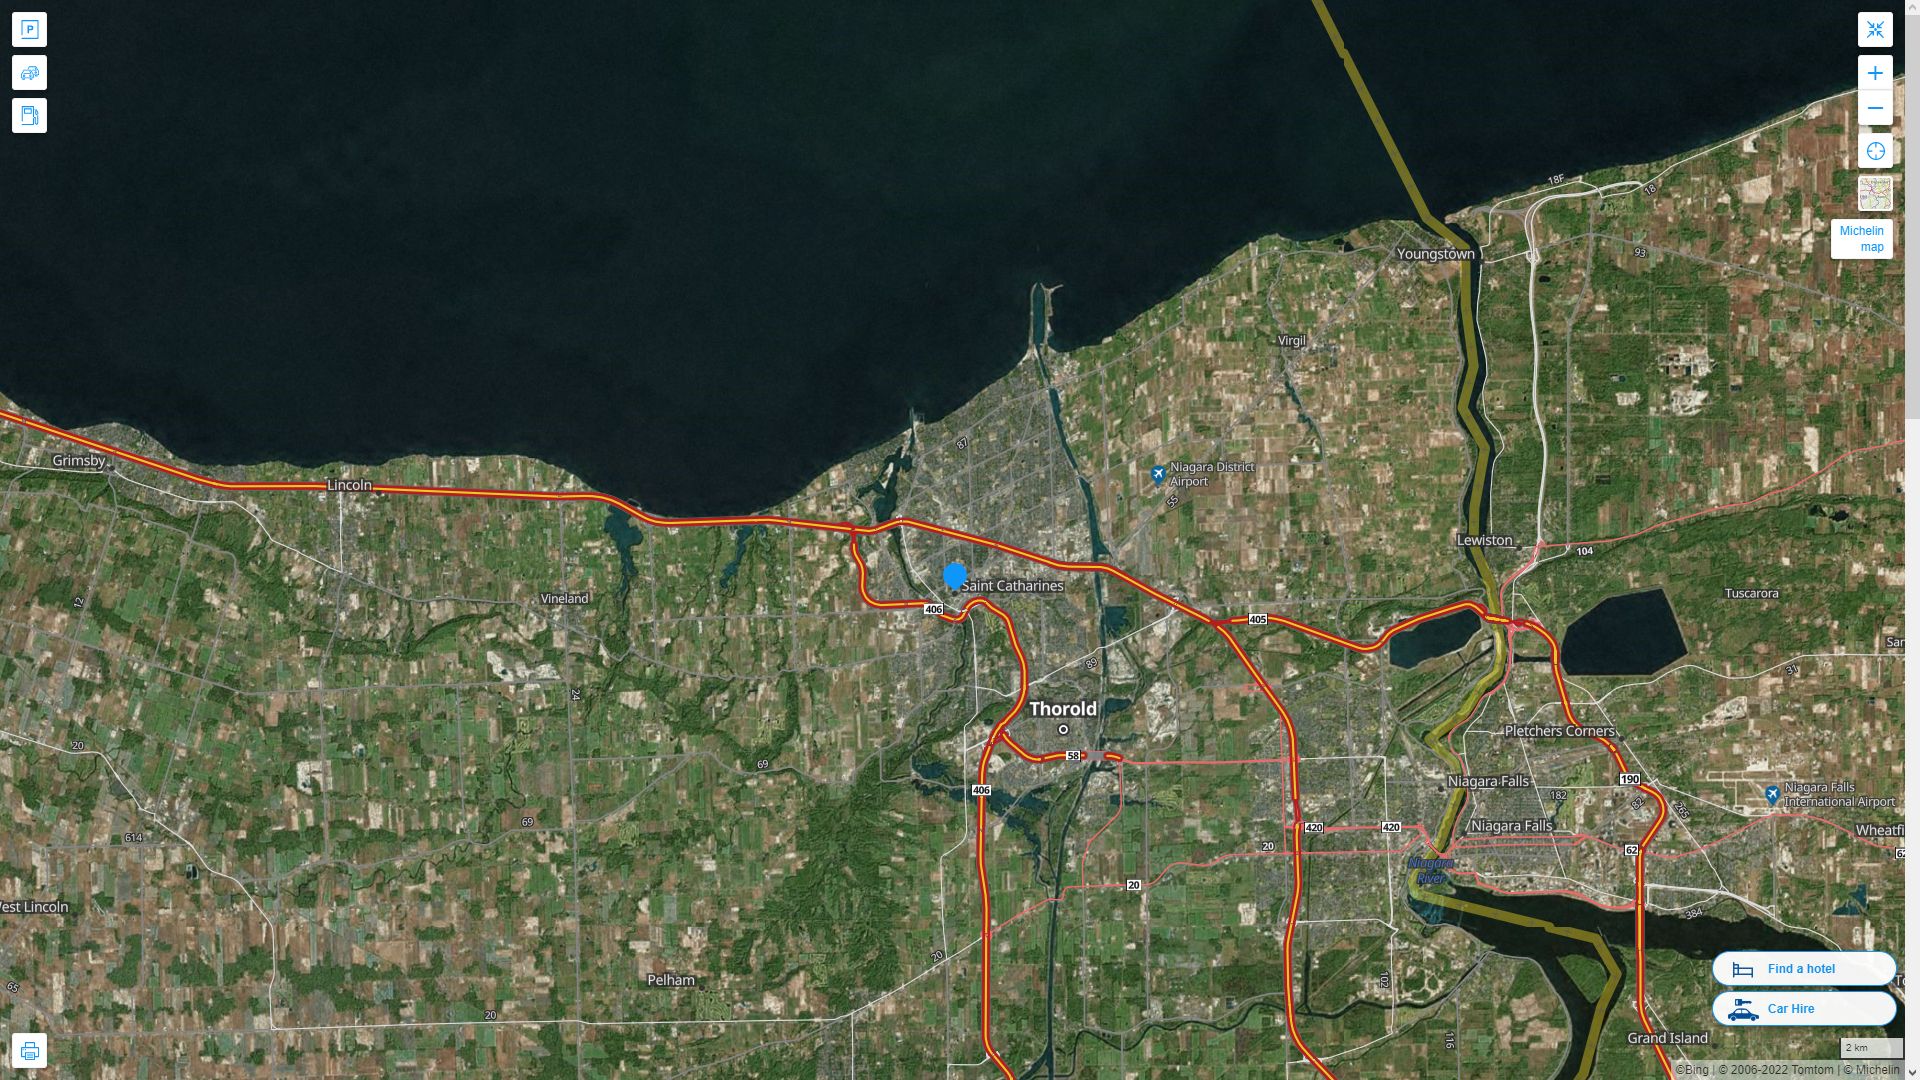 St. Catharines Highway and Road Map with Satellite View